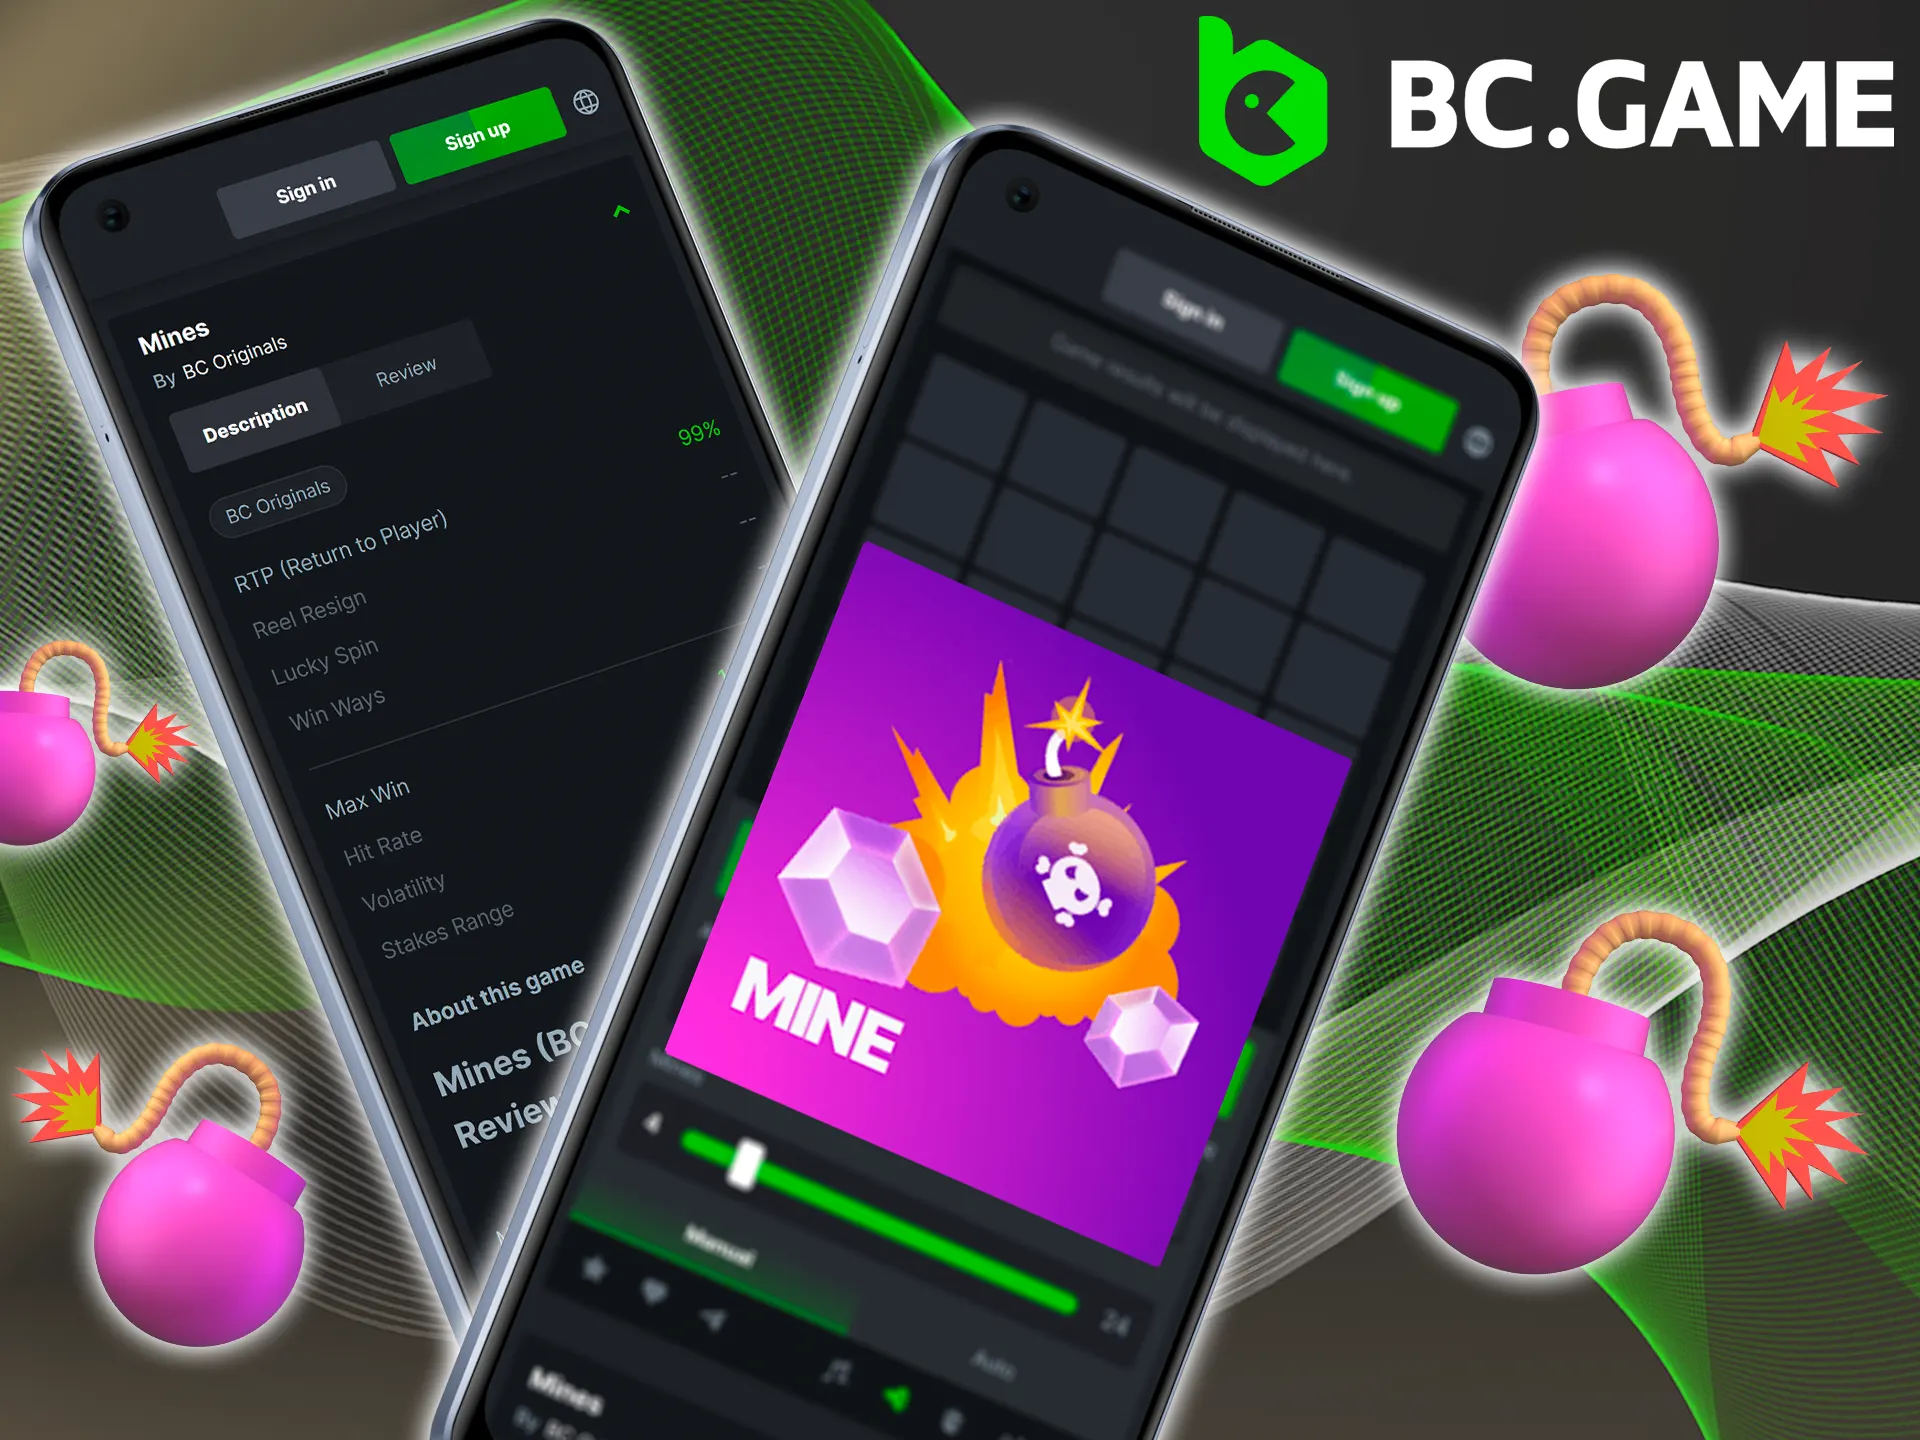 Download the BC Game app and play Mines using your smartphone.